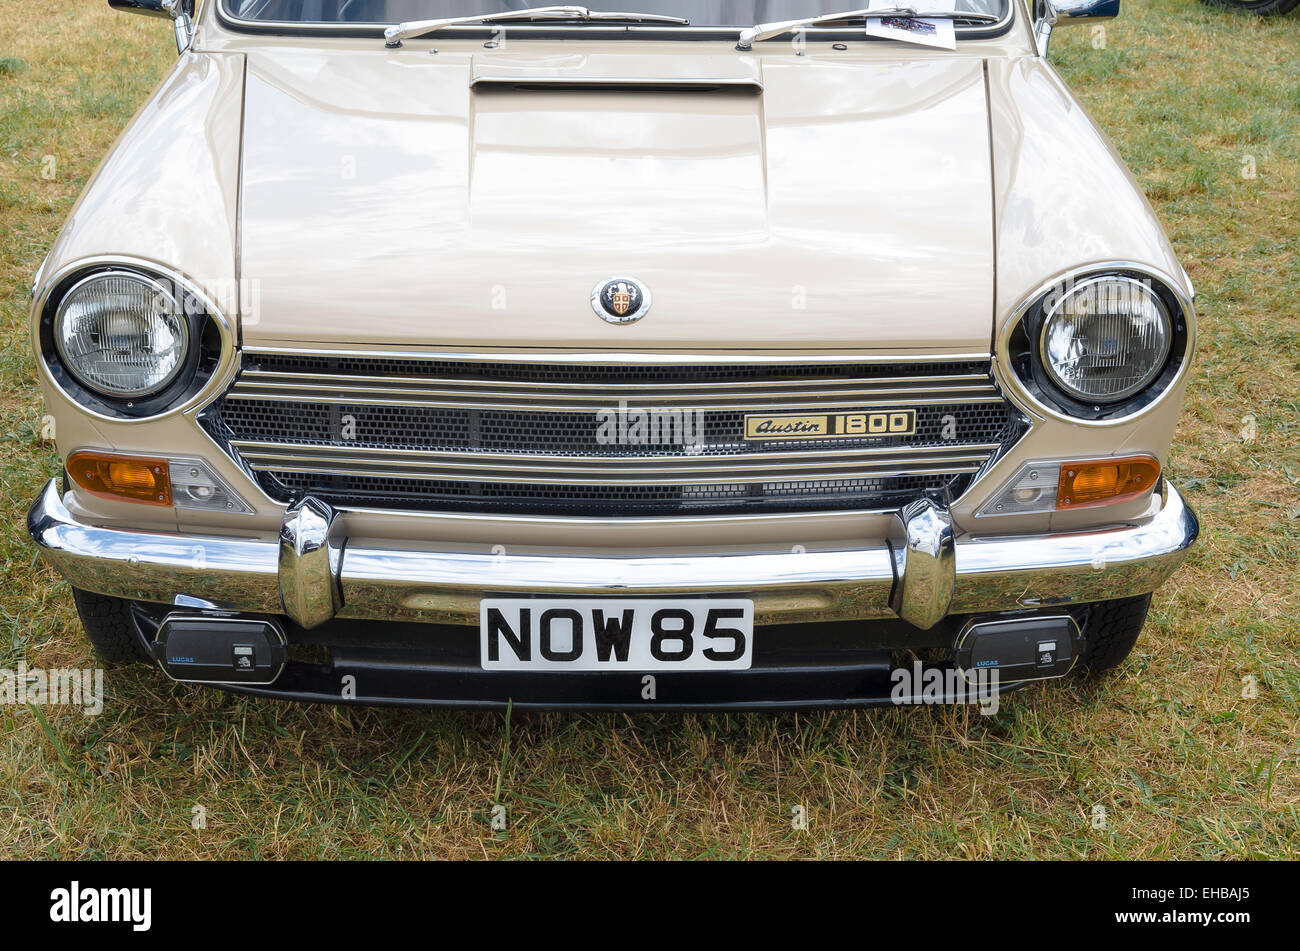 Front of Austin 1800 saloon car from the 1970s Stock Photo